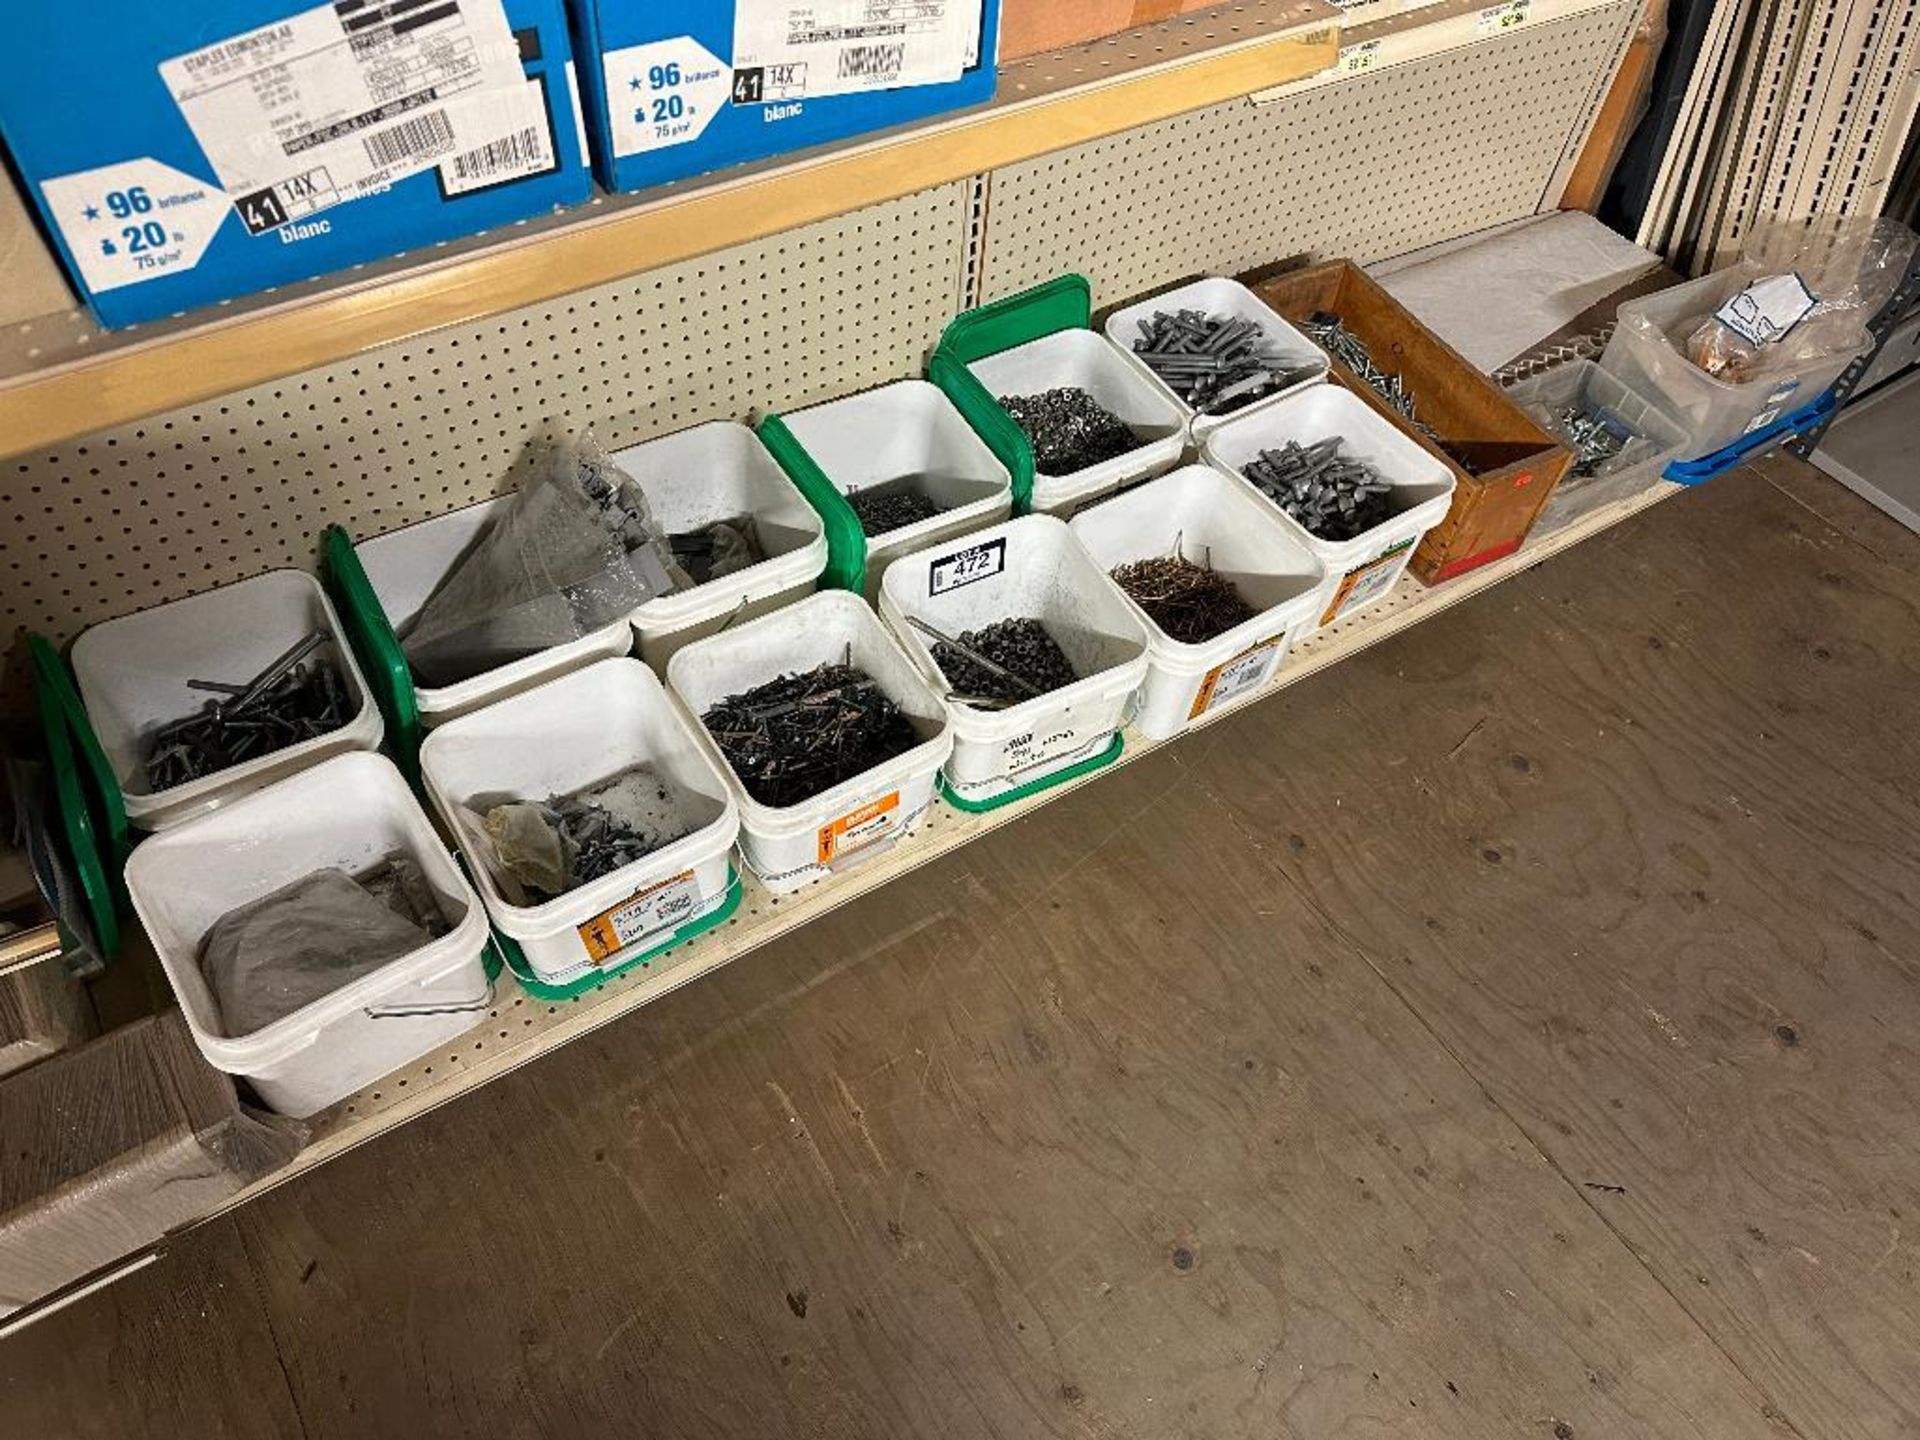 Lot of Asst. Fasteners including Screws, Nuts, Bolts, Nails, etc. - Image 2 of 5